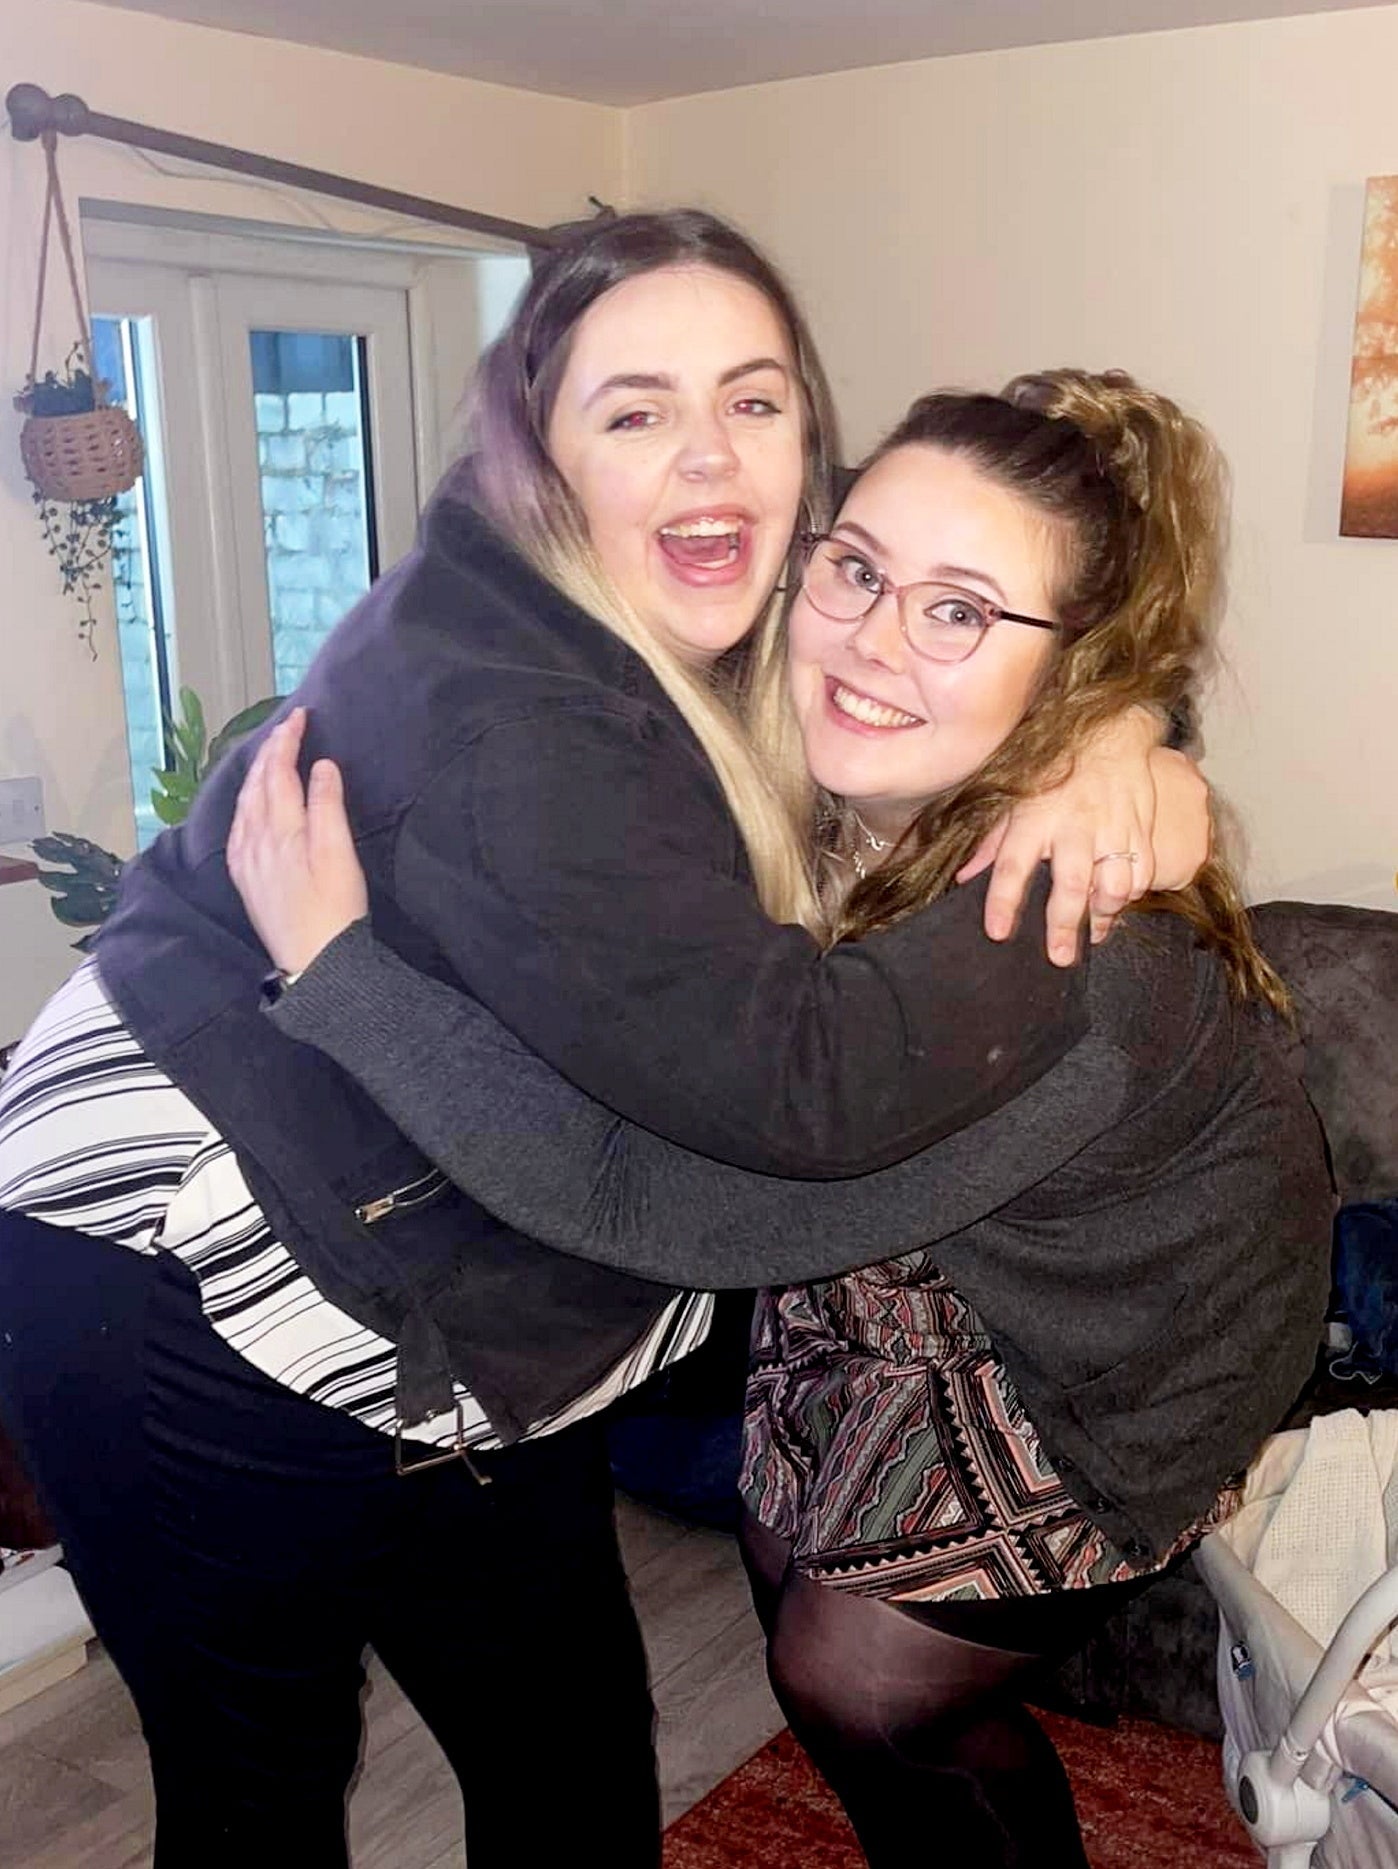 Chloe Quick who was put in a medically induced coma after having surgery for a gastric sleeve in Turkey - Pictured with friend Leah Mattson